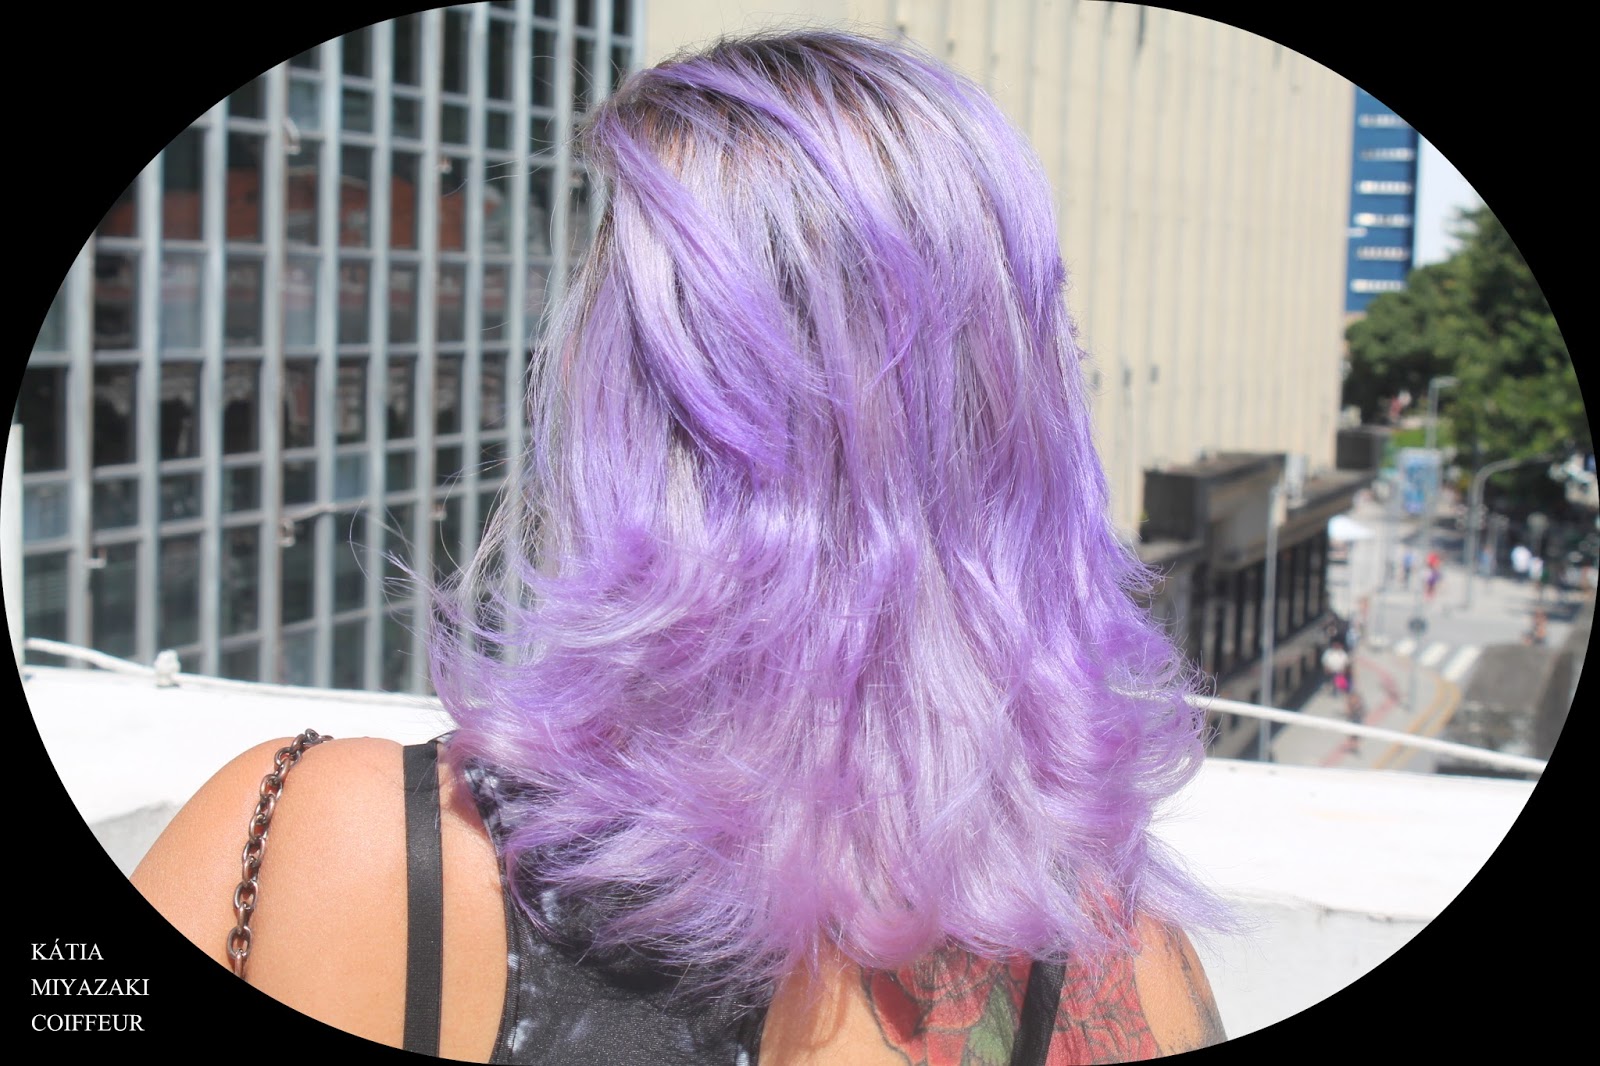 6. "The Difference Between Light Purple and Light Blue Hair" - wide 1